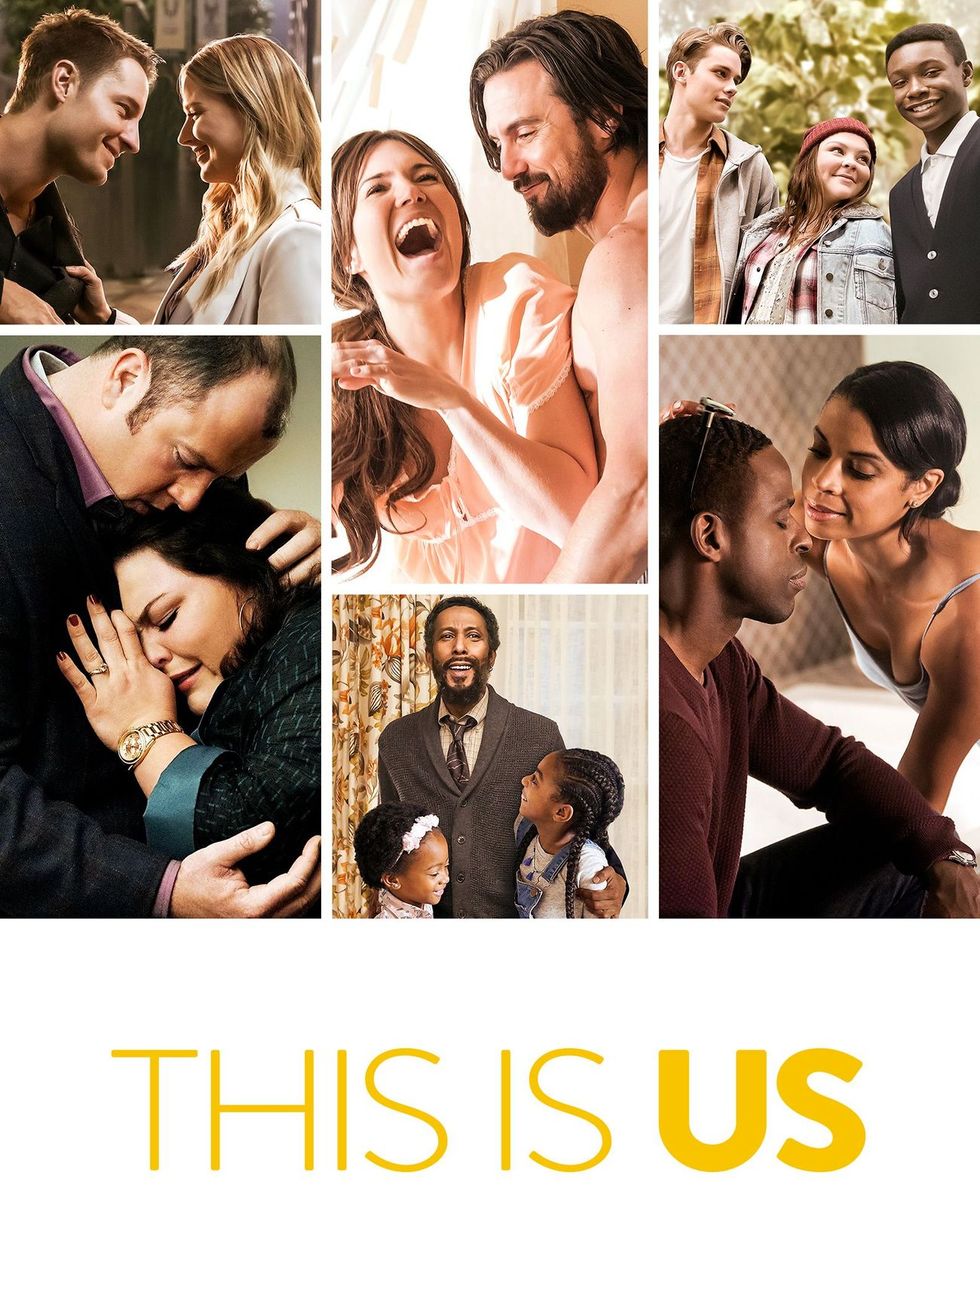 My 11 Favorite "This Is Us" Episodes